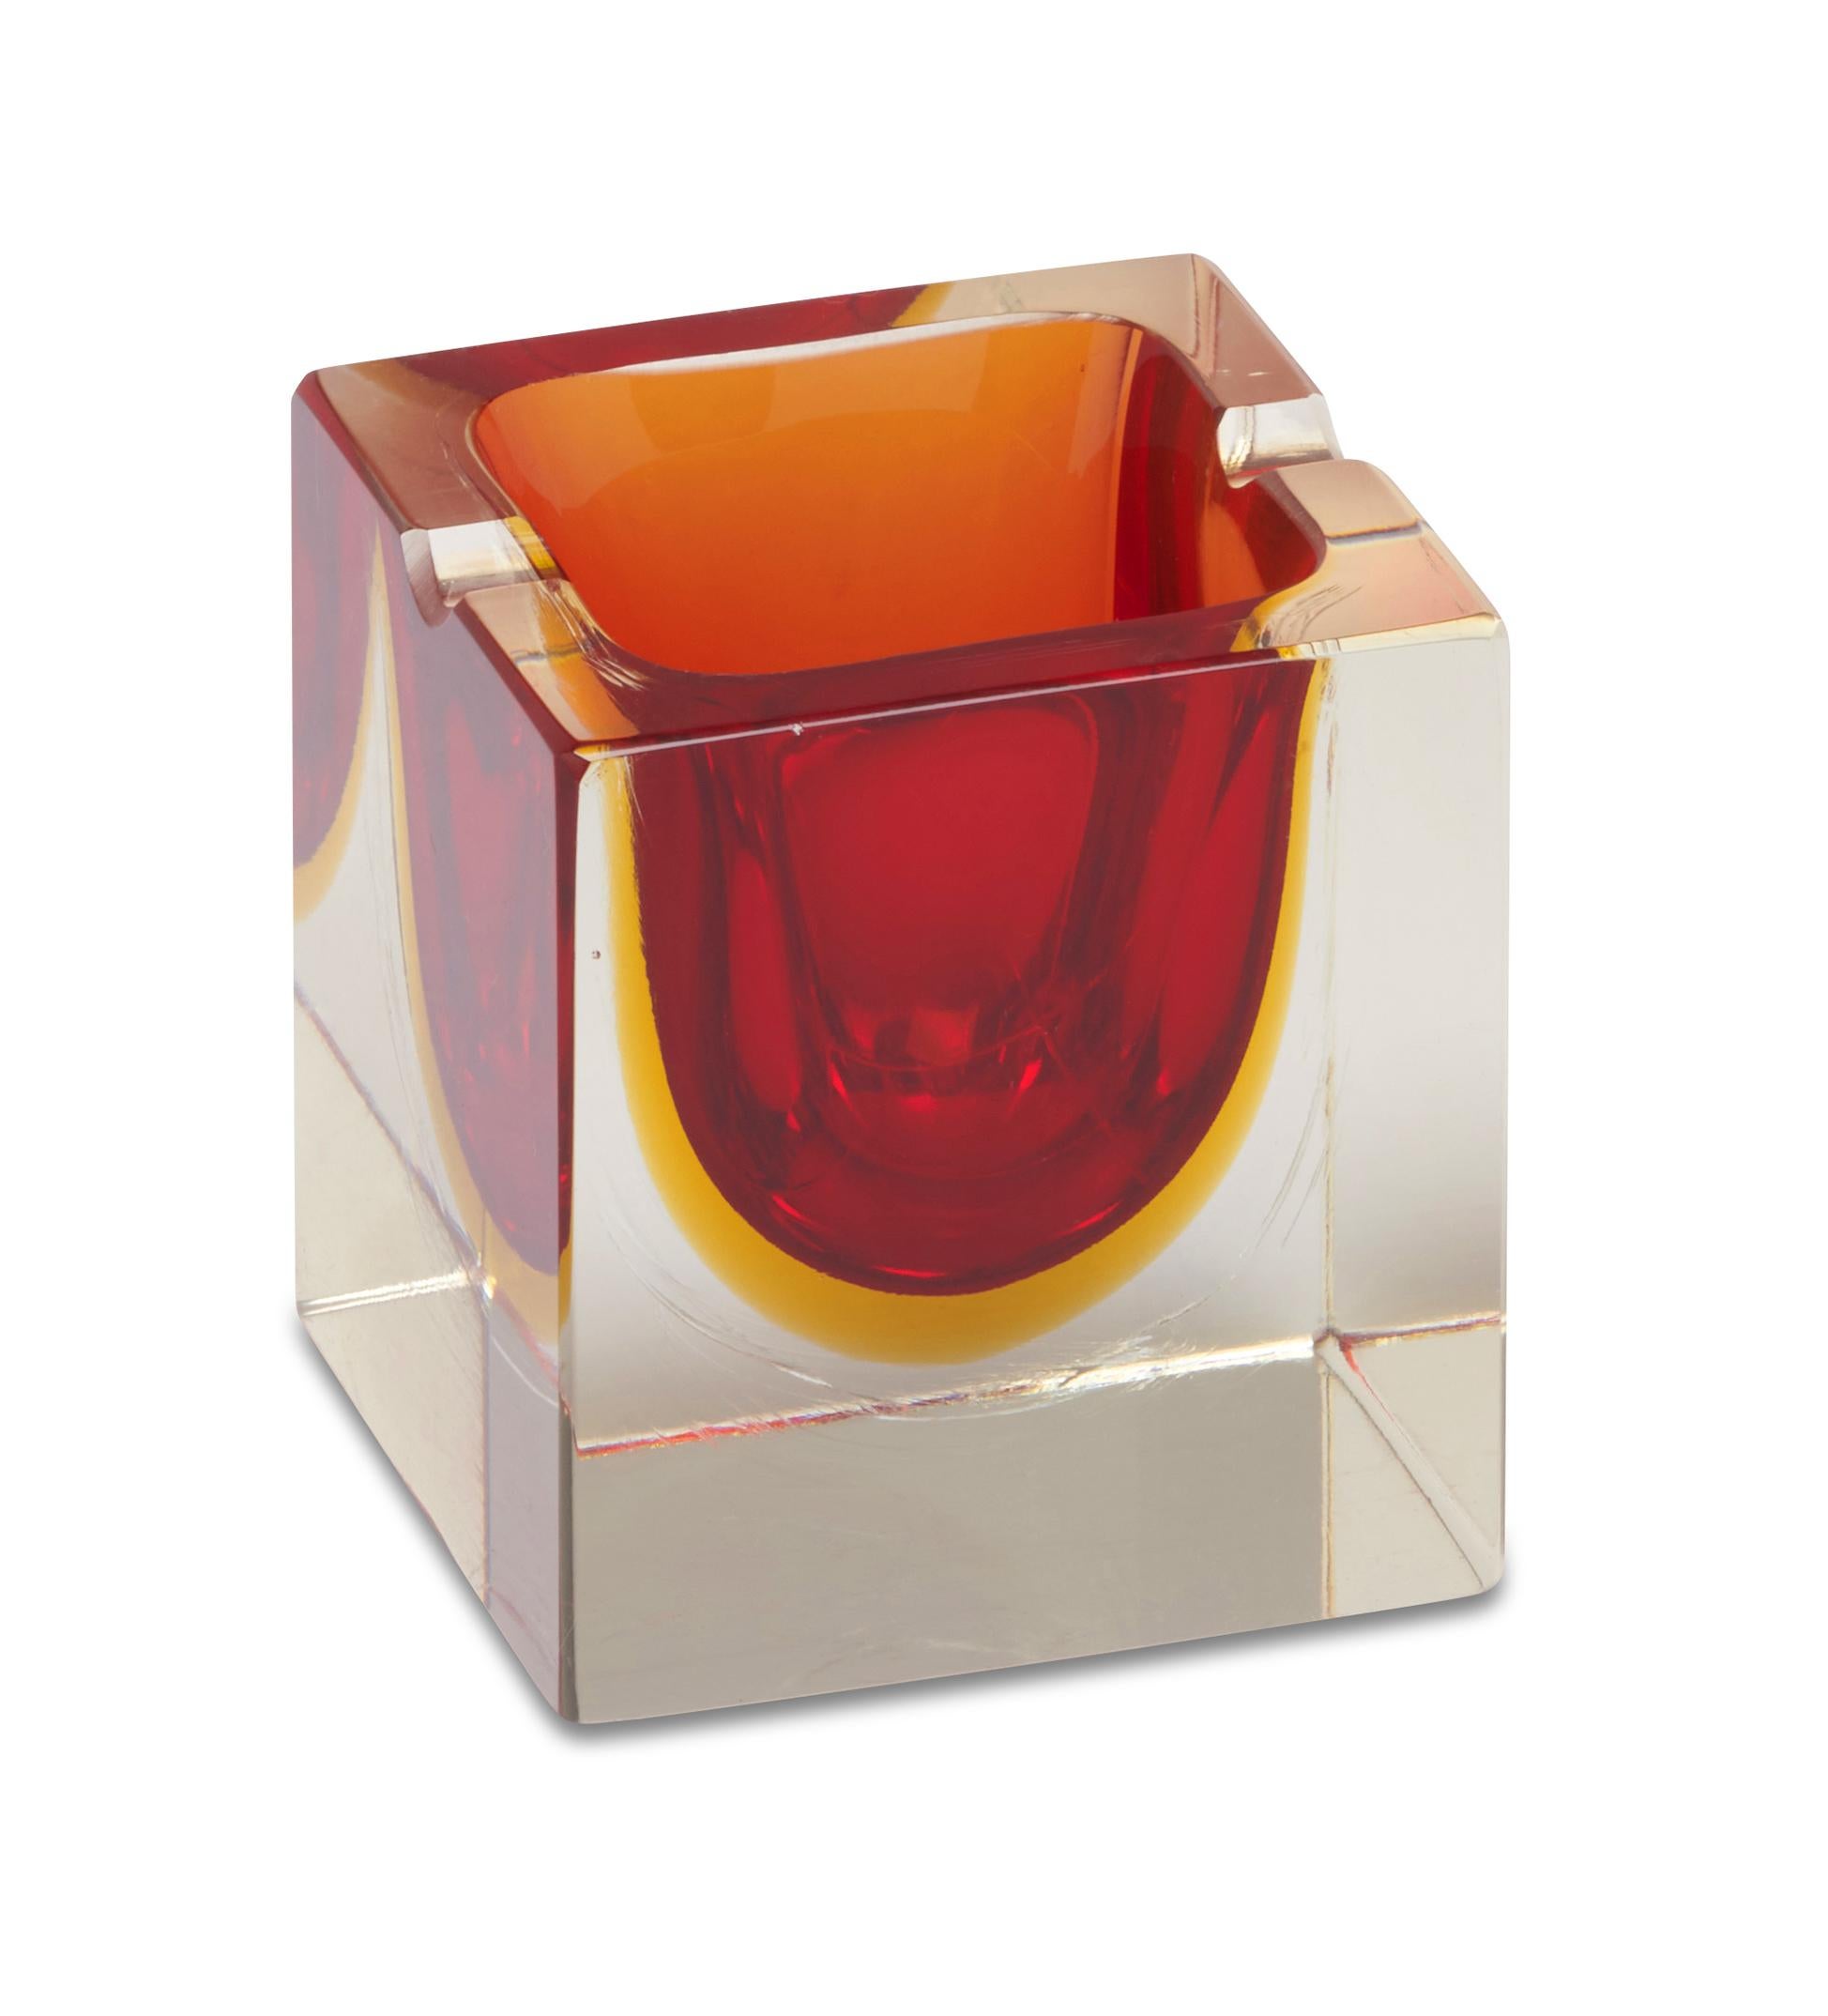 Flavio Poli (1900-1984) was an Italian glass designer known for his masterful vases and lamps. His submerged glass pieces, which were made by layering transparent colors and textures, were later awarded the Italian Compasso d’Oro (Golden Compass)